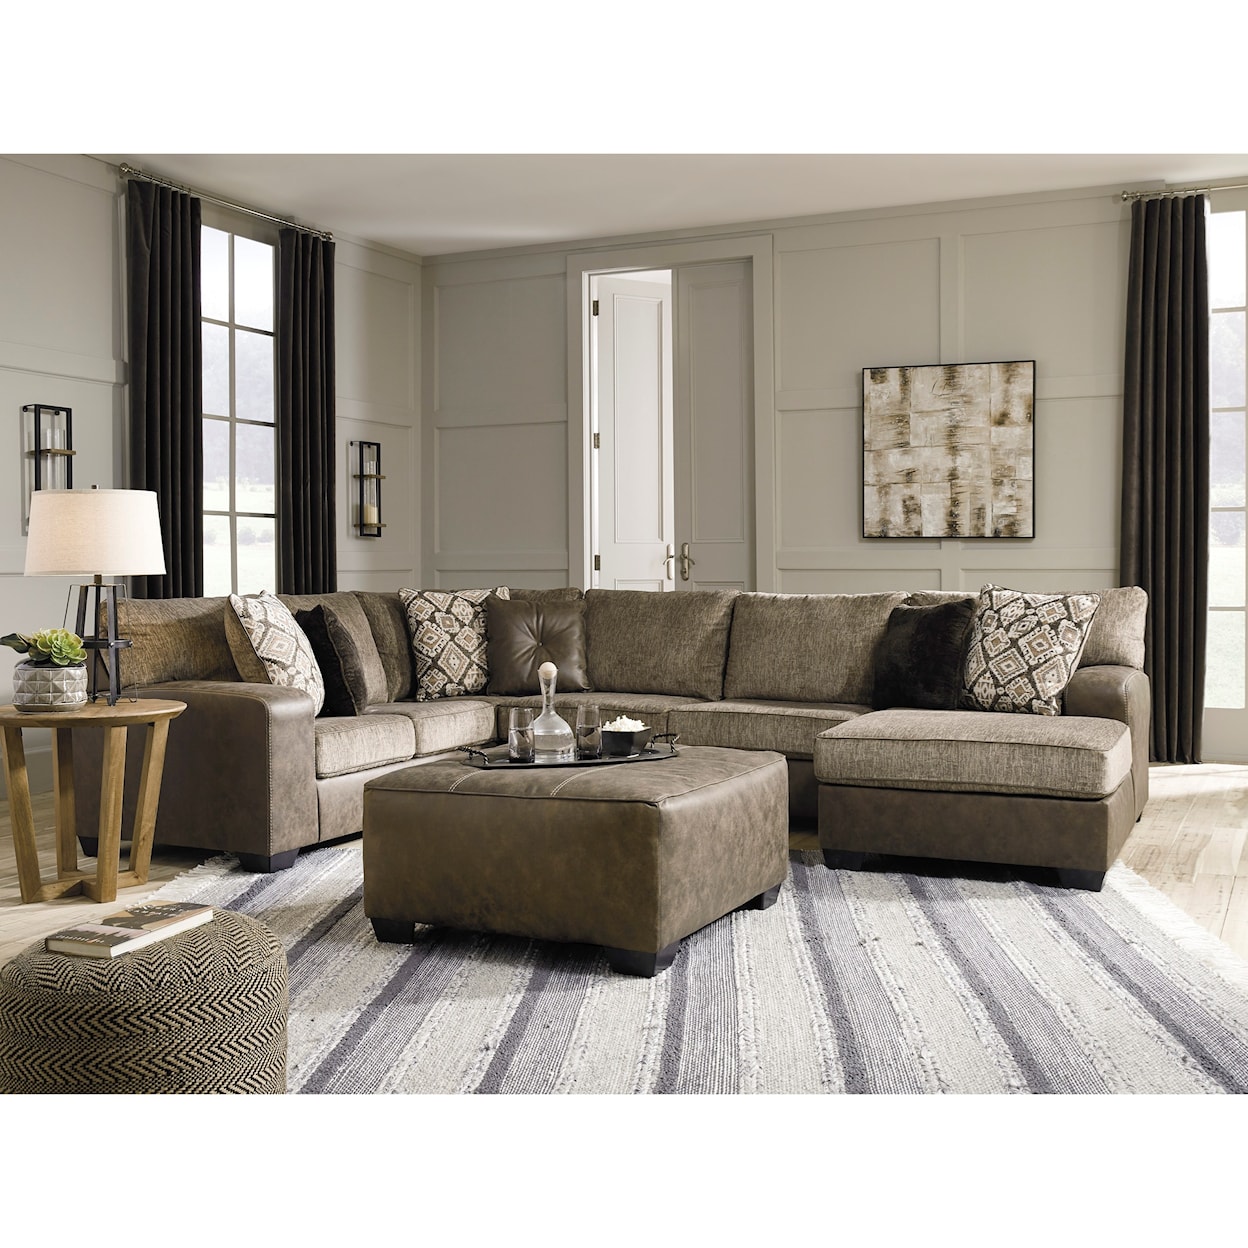 Ashley Furniture Benchcraft Abalone 3-Piece Sectional